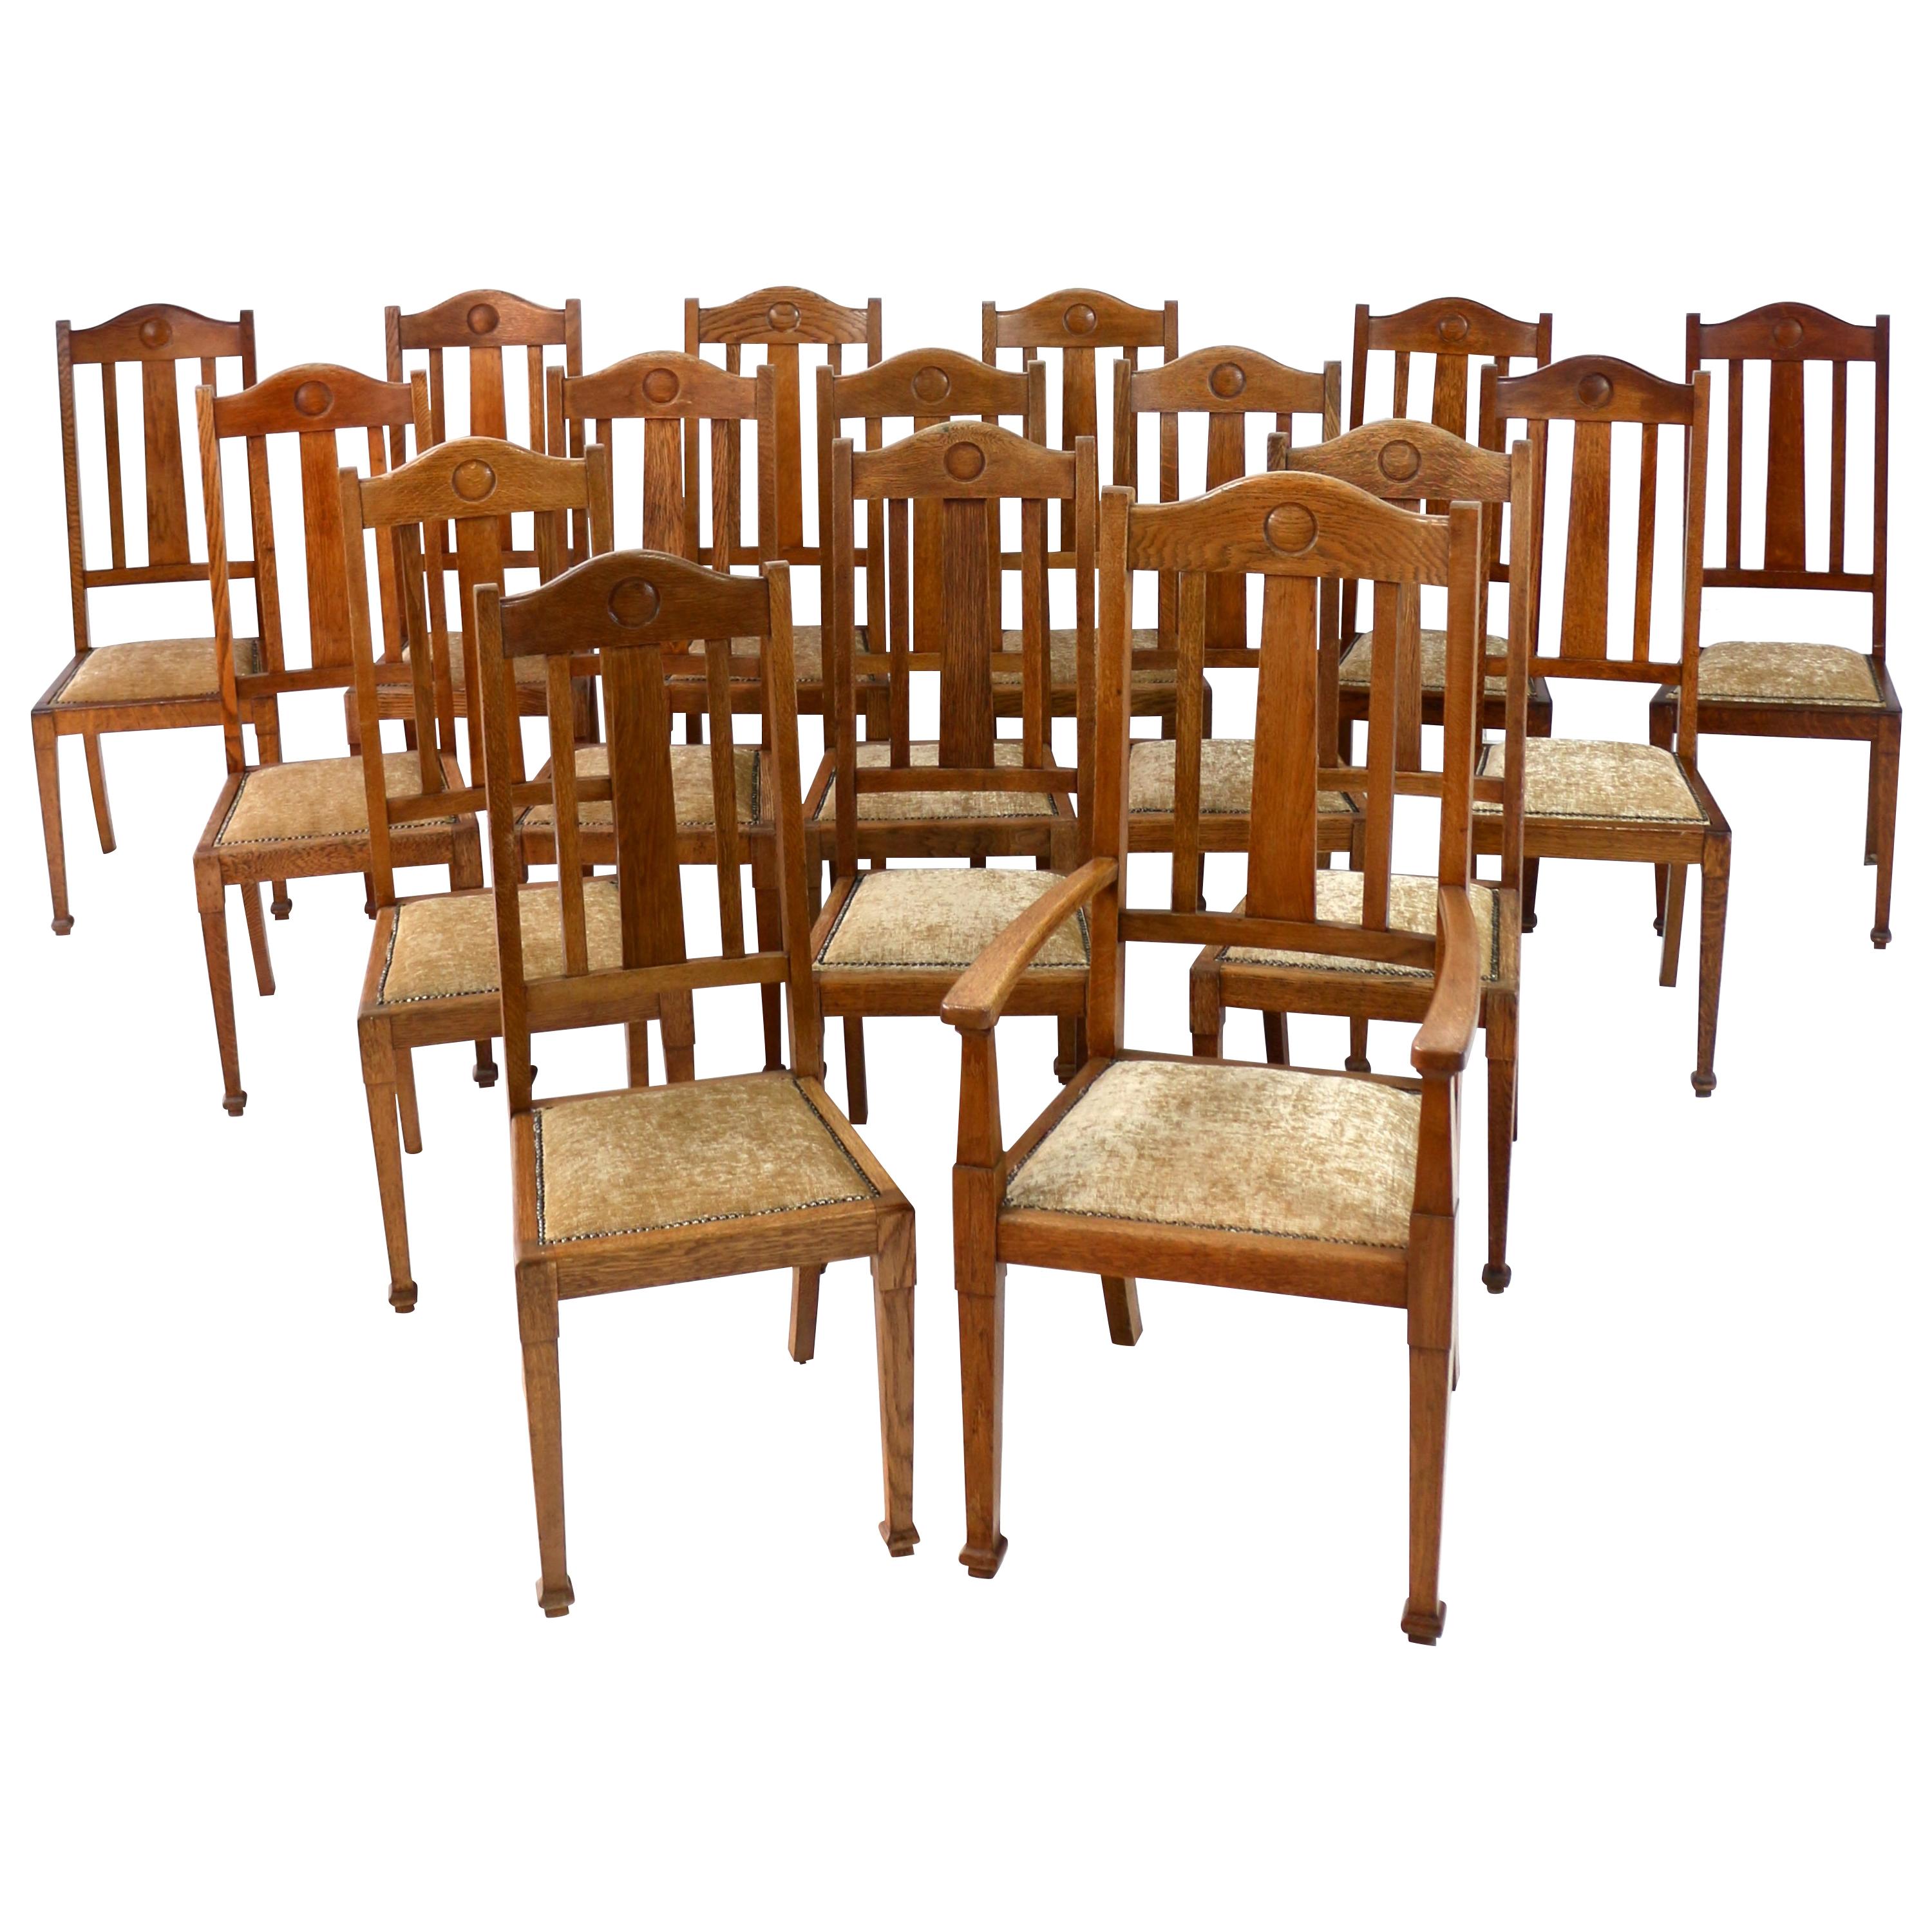 Antique English Set of 16 Arts & Crafts Oak Dining Chairs by Shapland & Petter